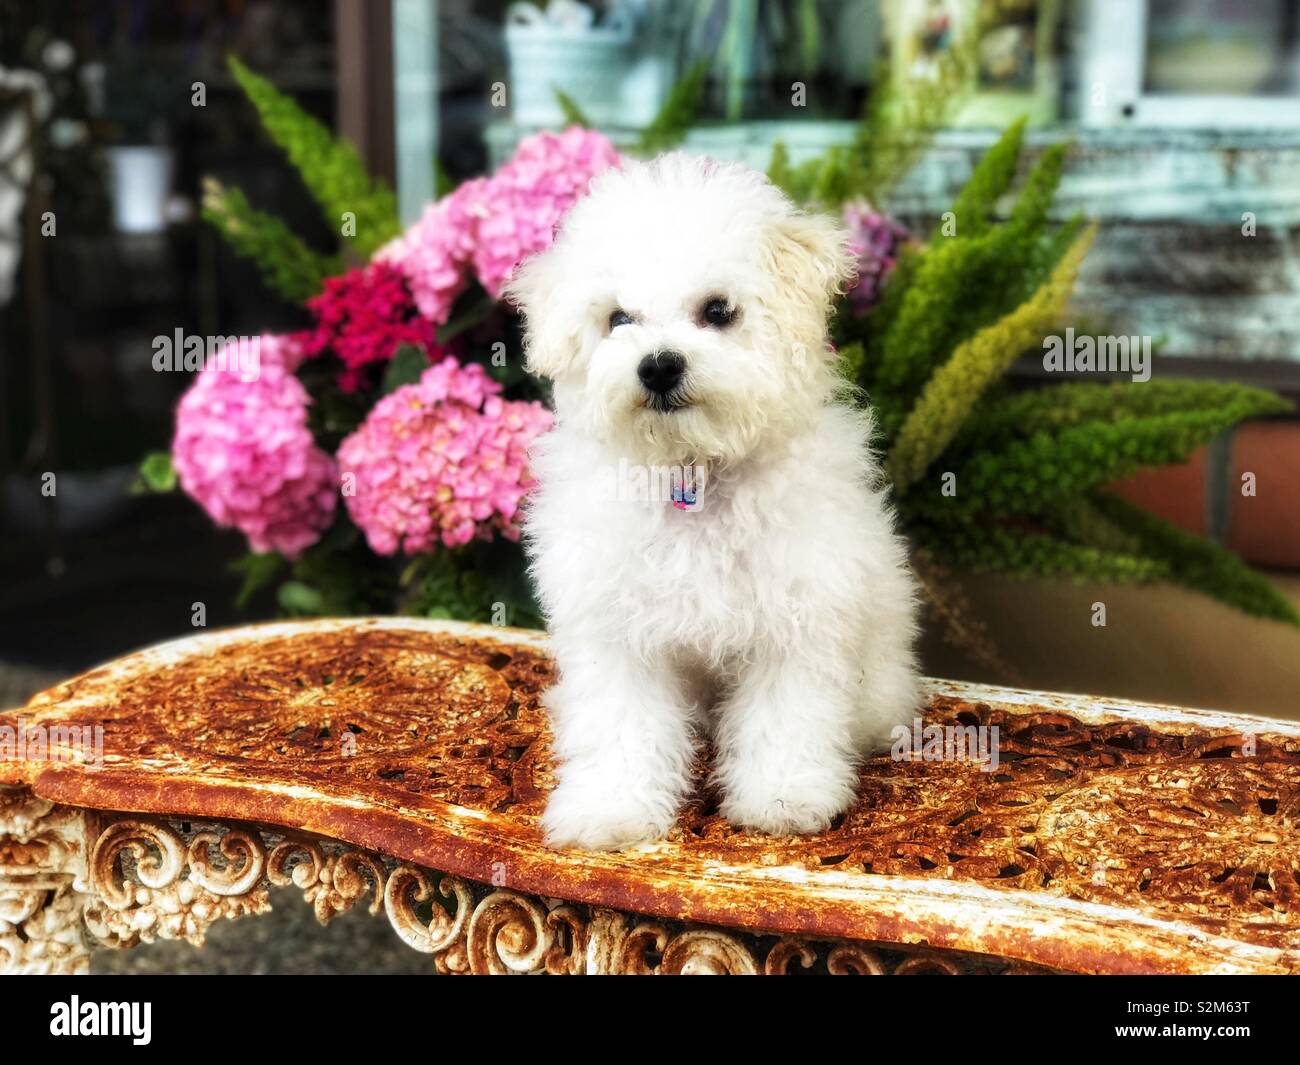 Furry White Puppy Dog Sitting On A Rusted White Ornate Bench With Hydrangea Flowers And Others In Background Stock Photo Alamy